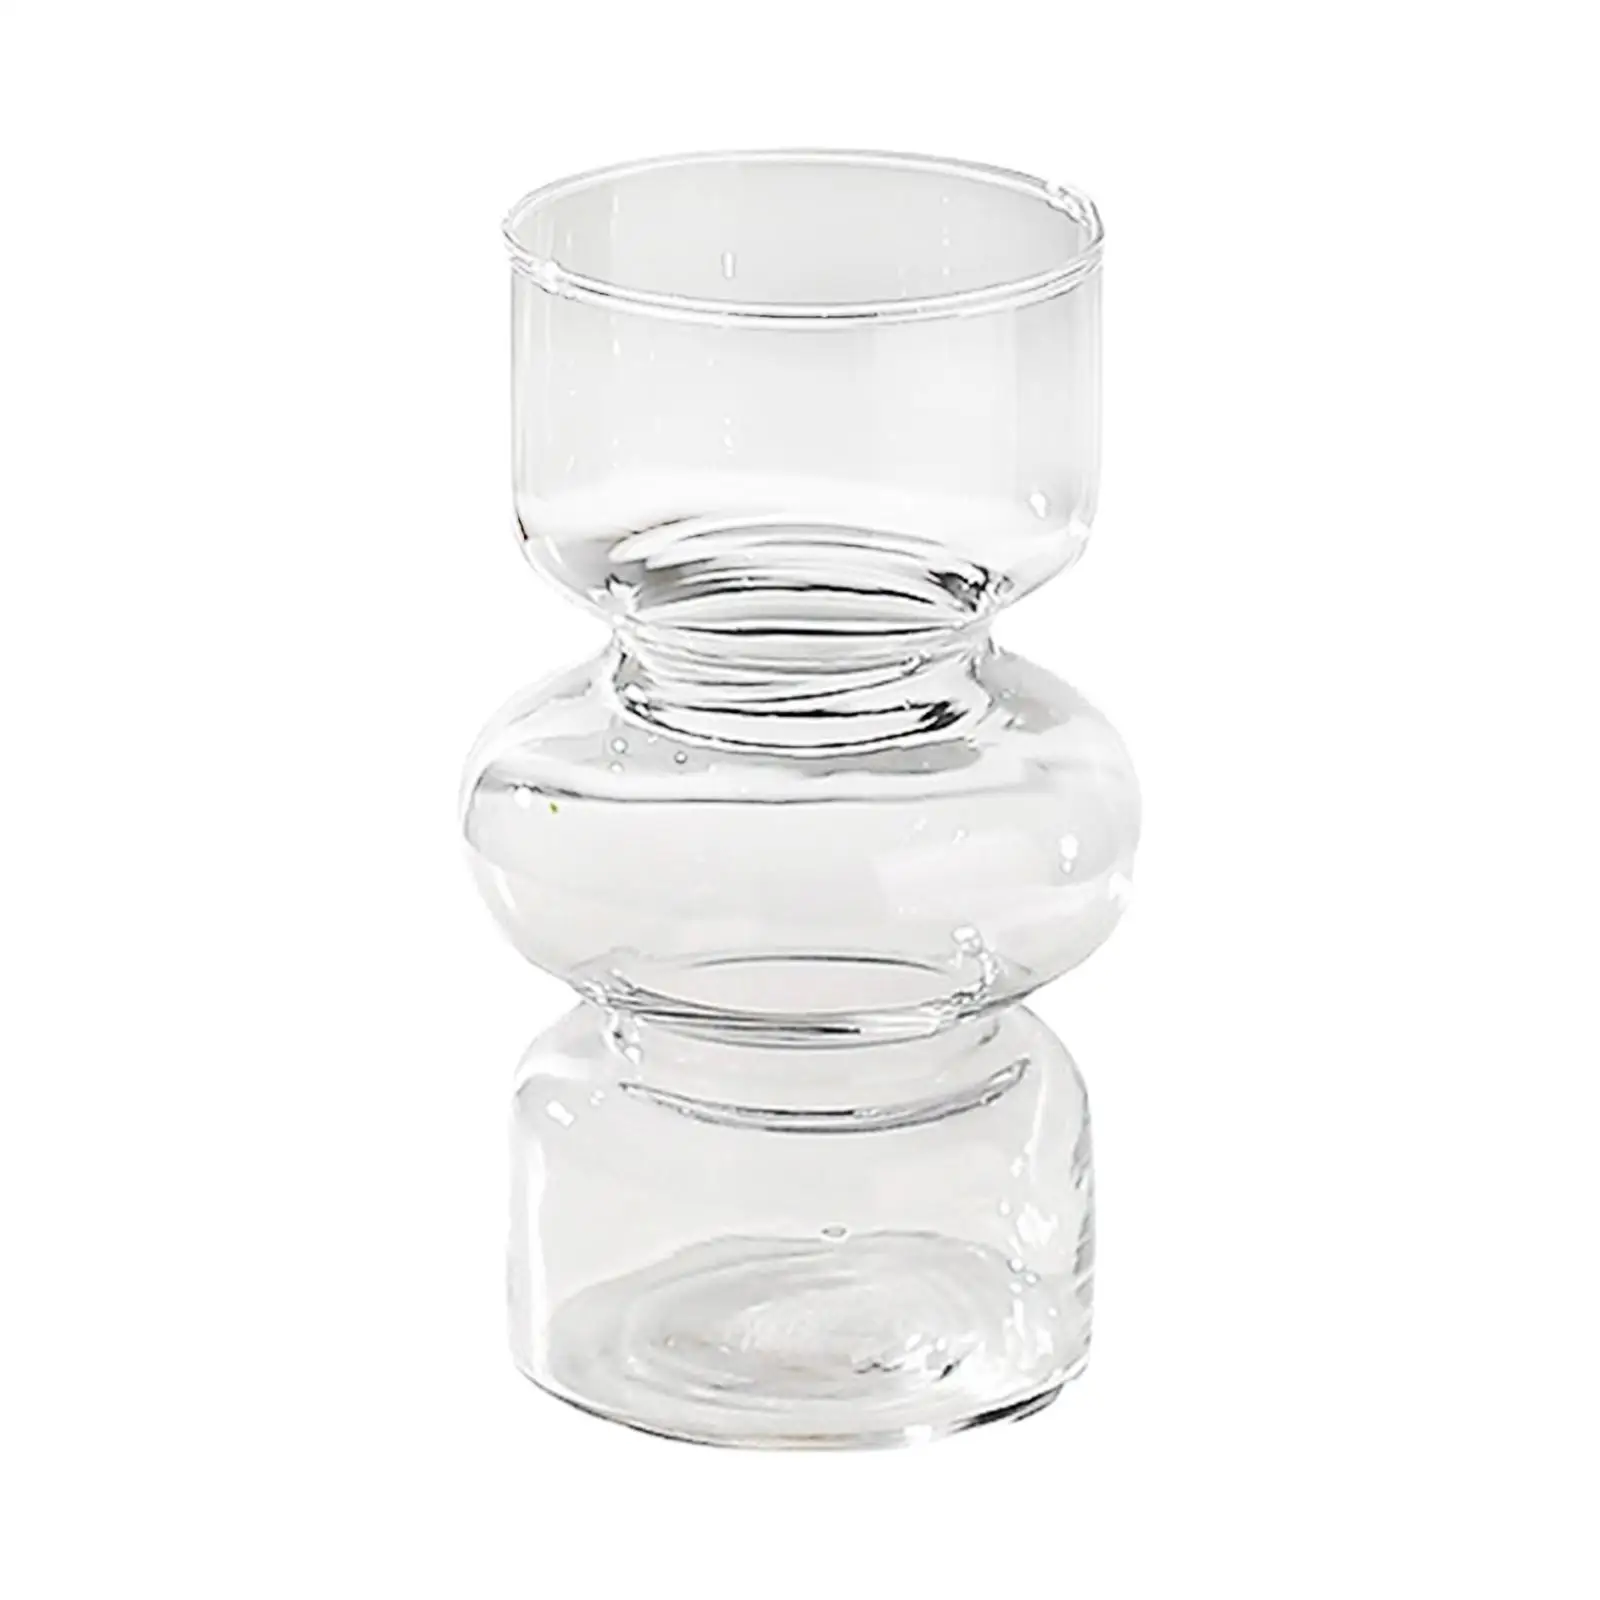 Glass Bud Vase Cabinet Stylish Floral Arrangement Creative Clear Containers Desk for Restaurant Hotel Gift Office Holidays